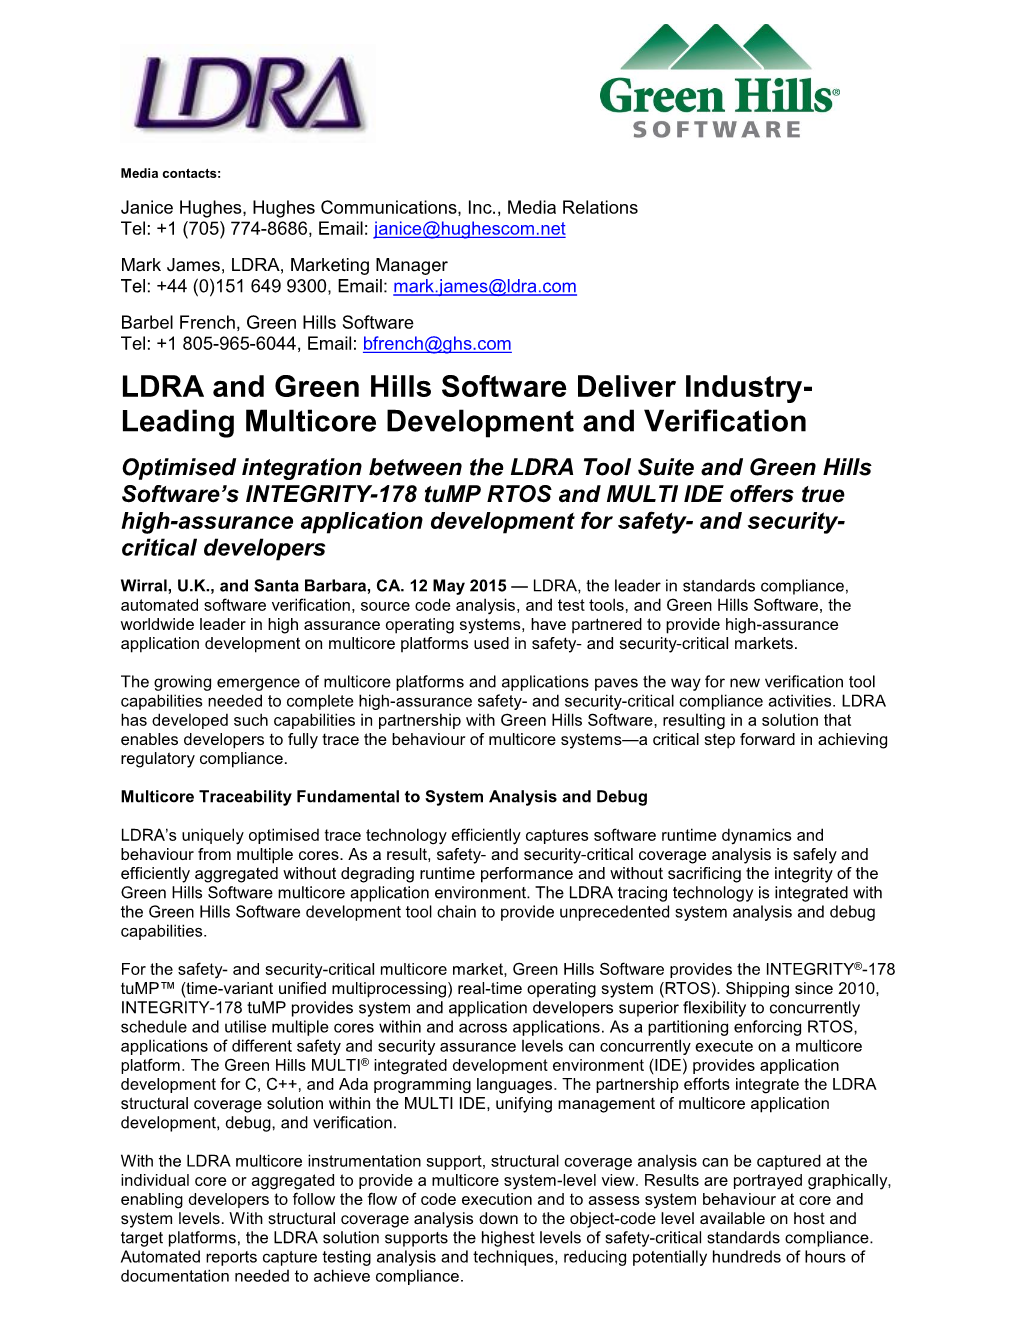 LDRA and Green Hills Software Deliver Industry- Leading Multicore Development and Verification